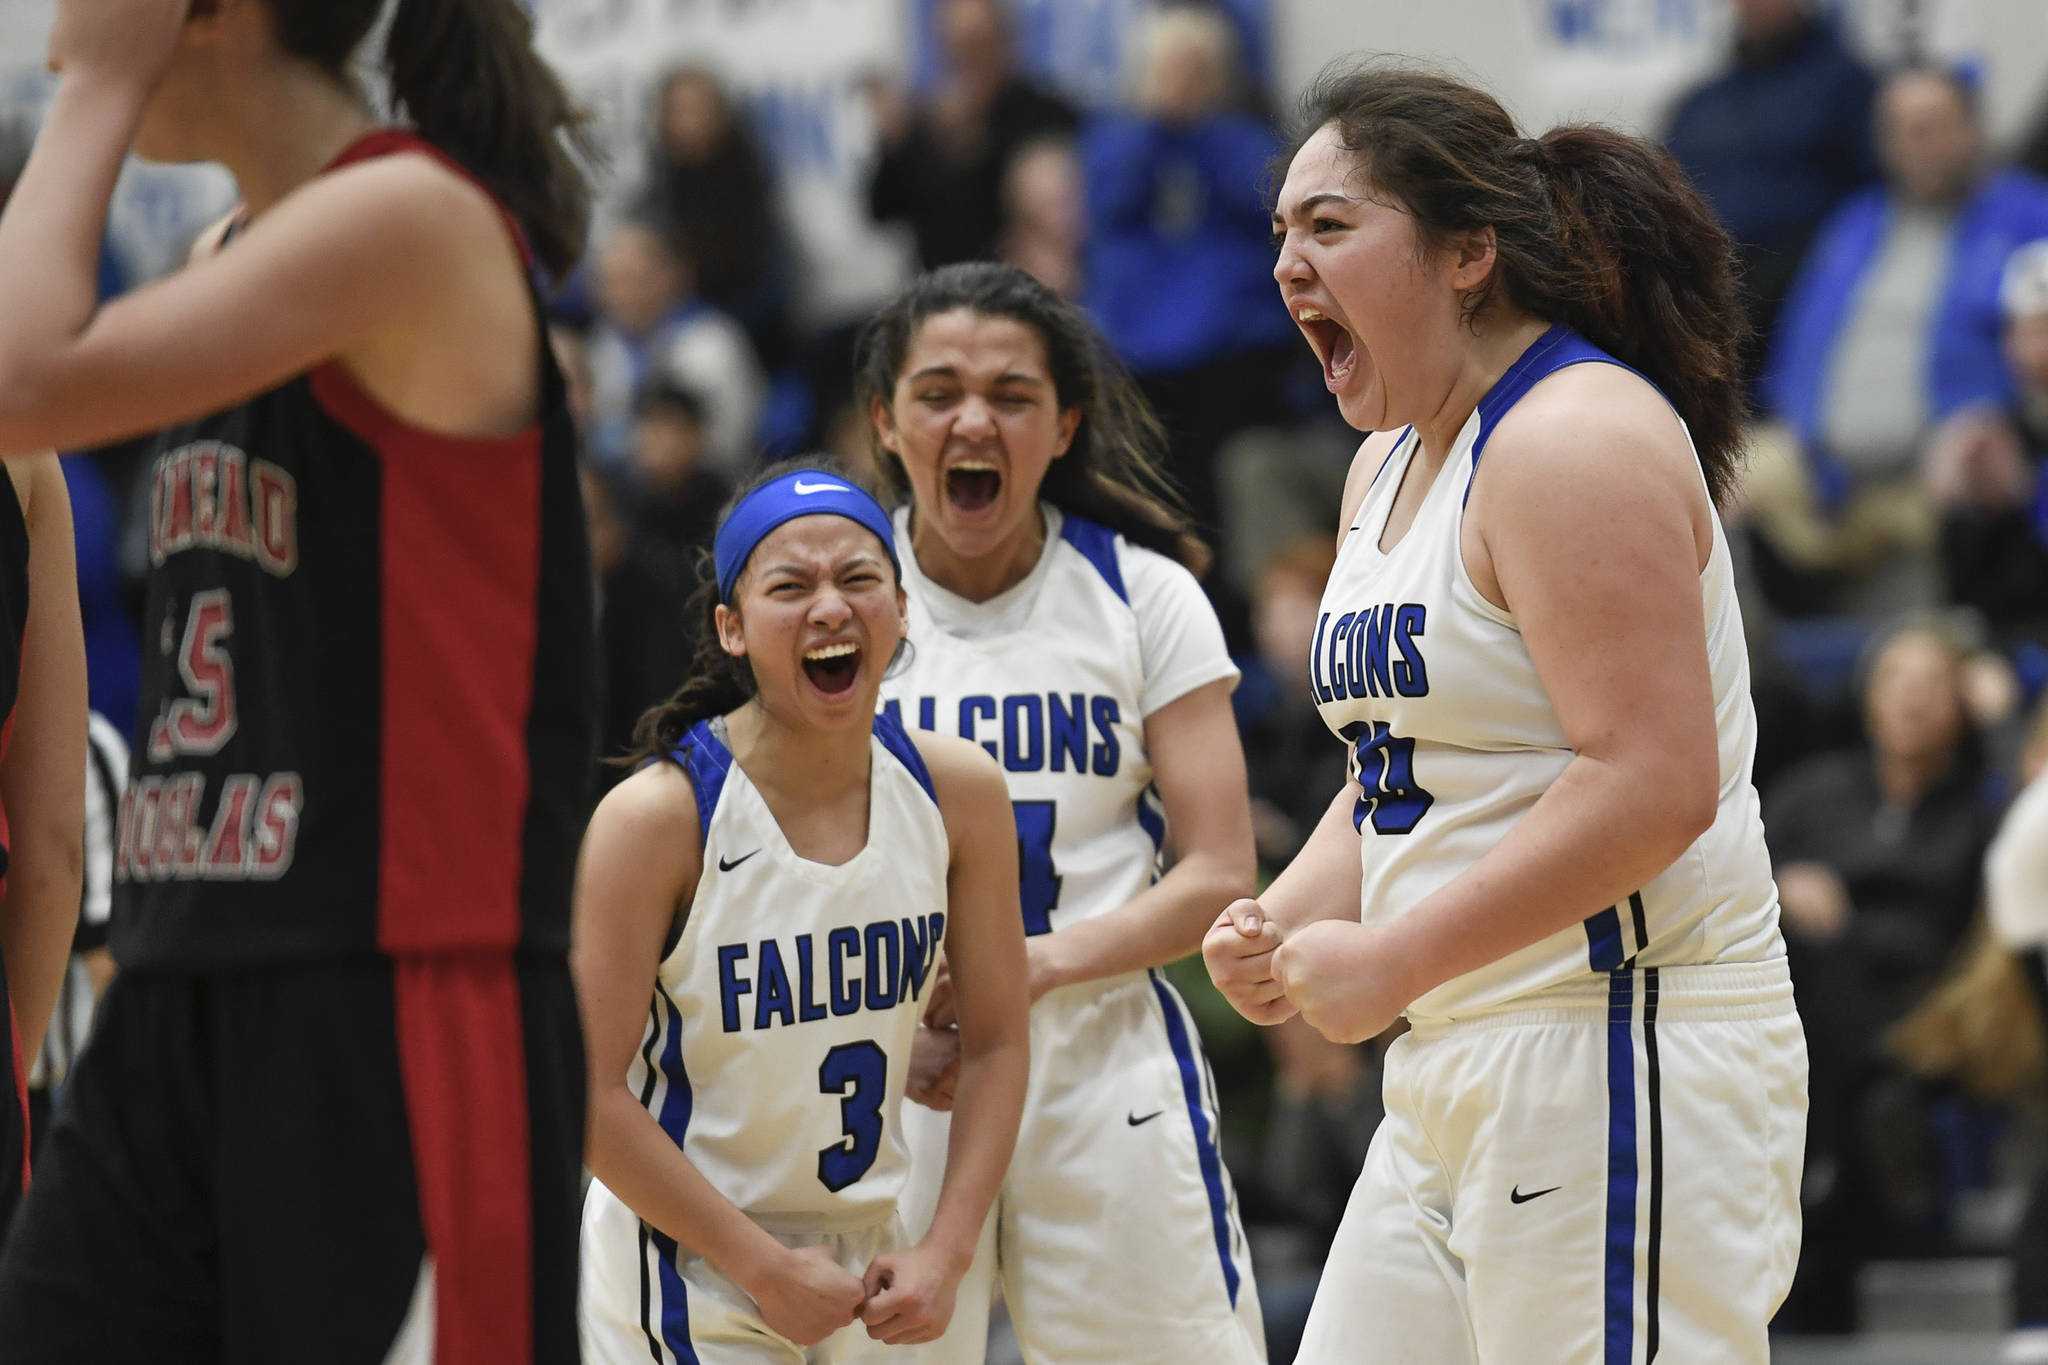 Sister act propels Falcons to crosstown rivalry win